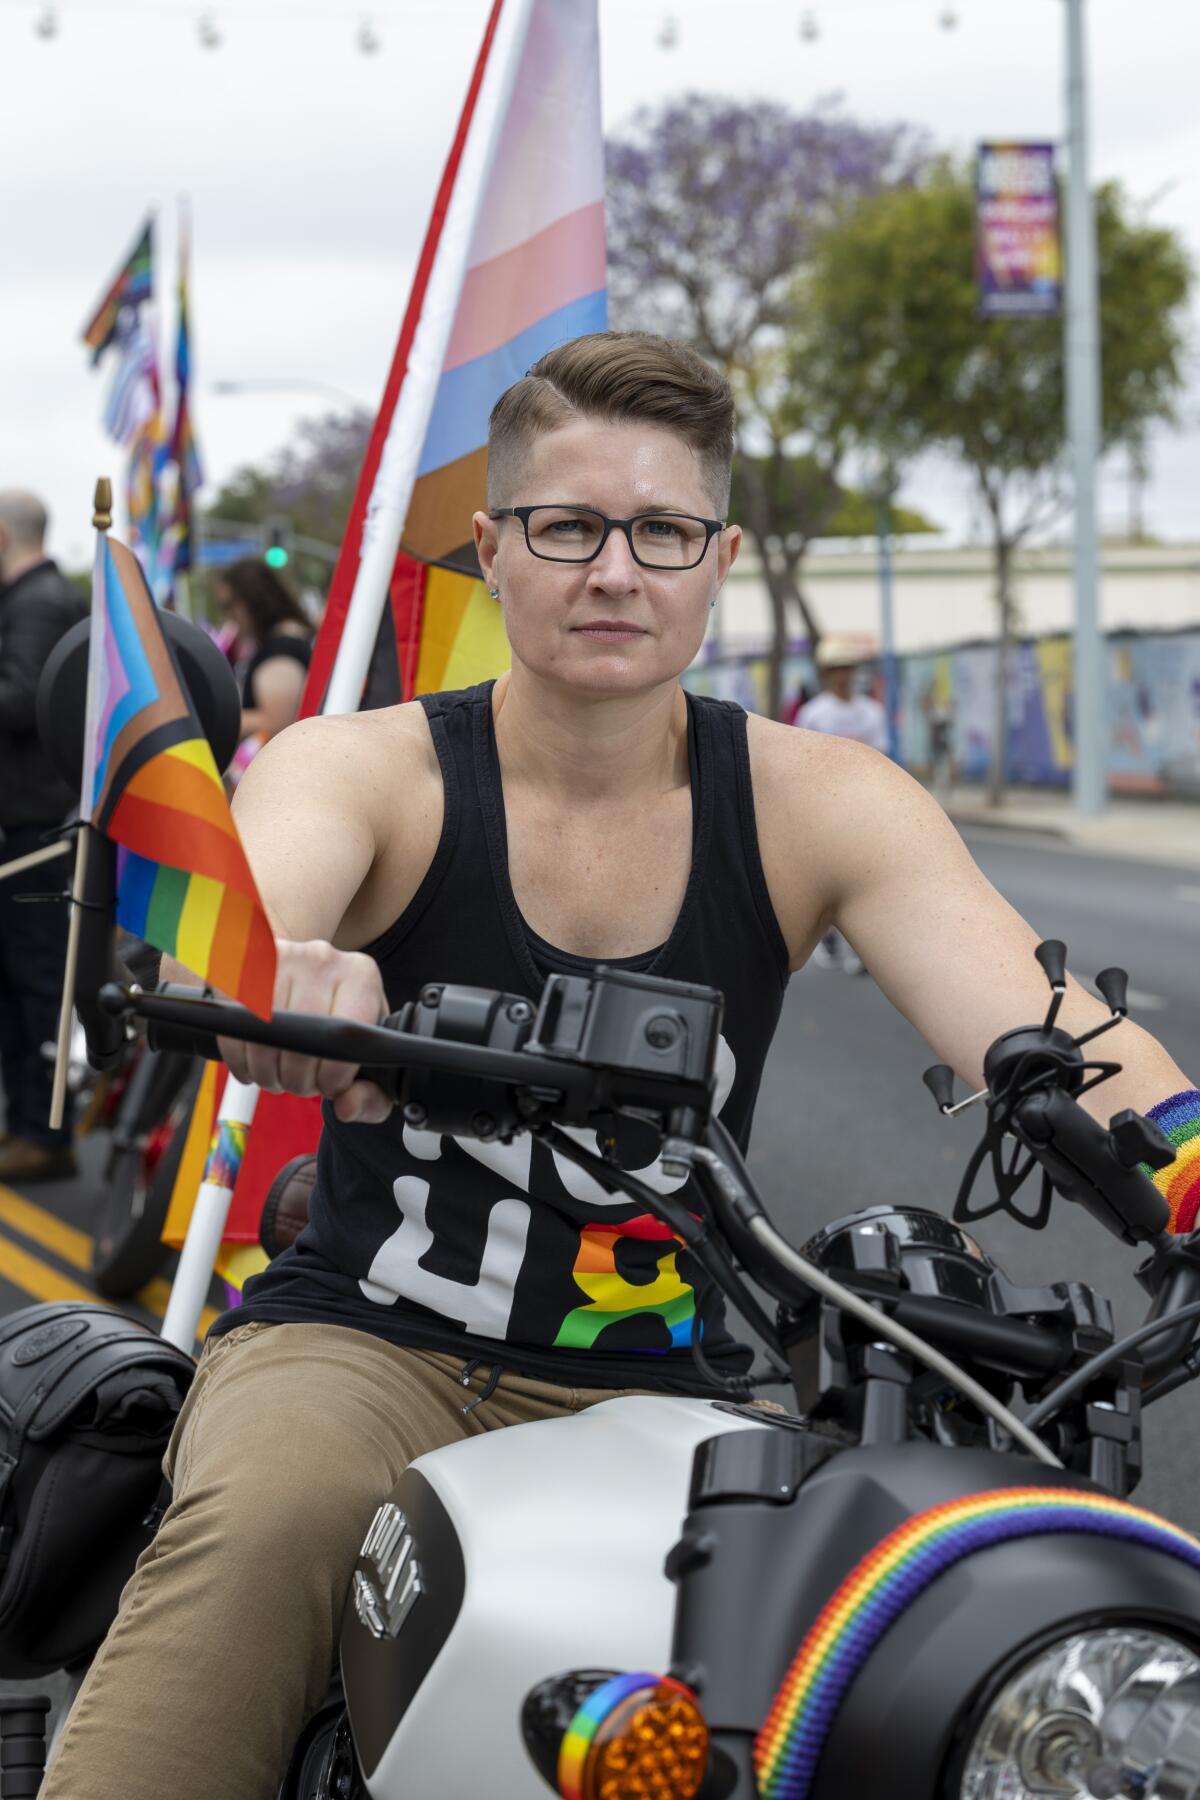 A person in a black tank top and glasses rides a motorcycle.